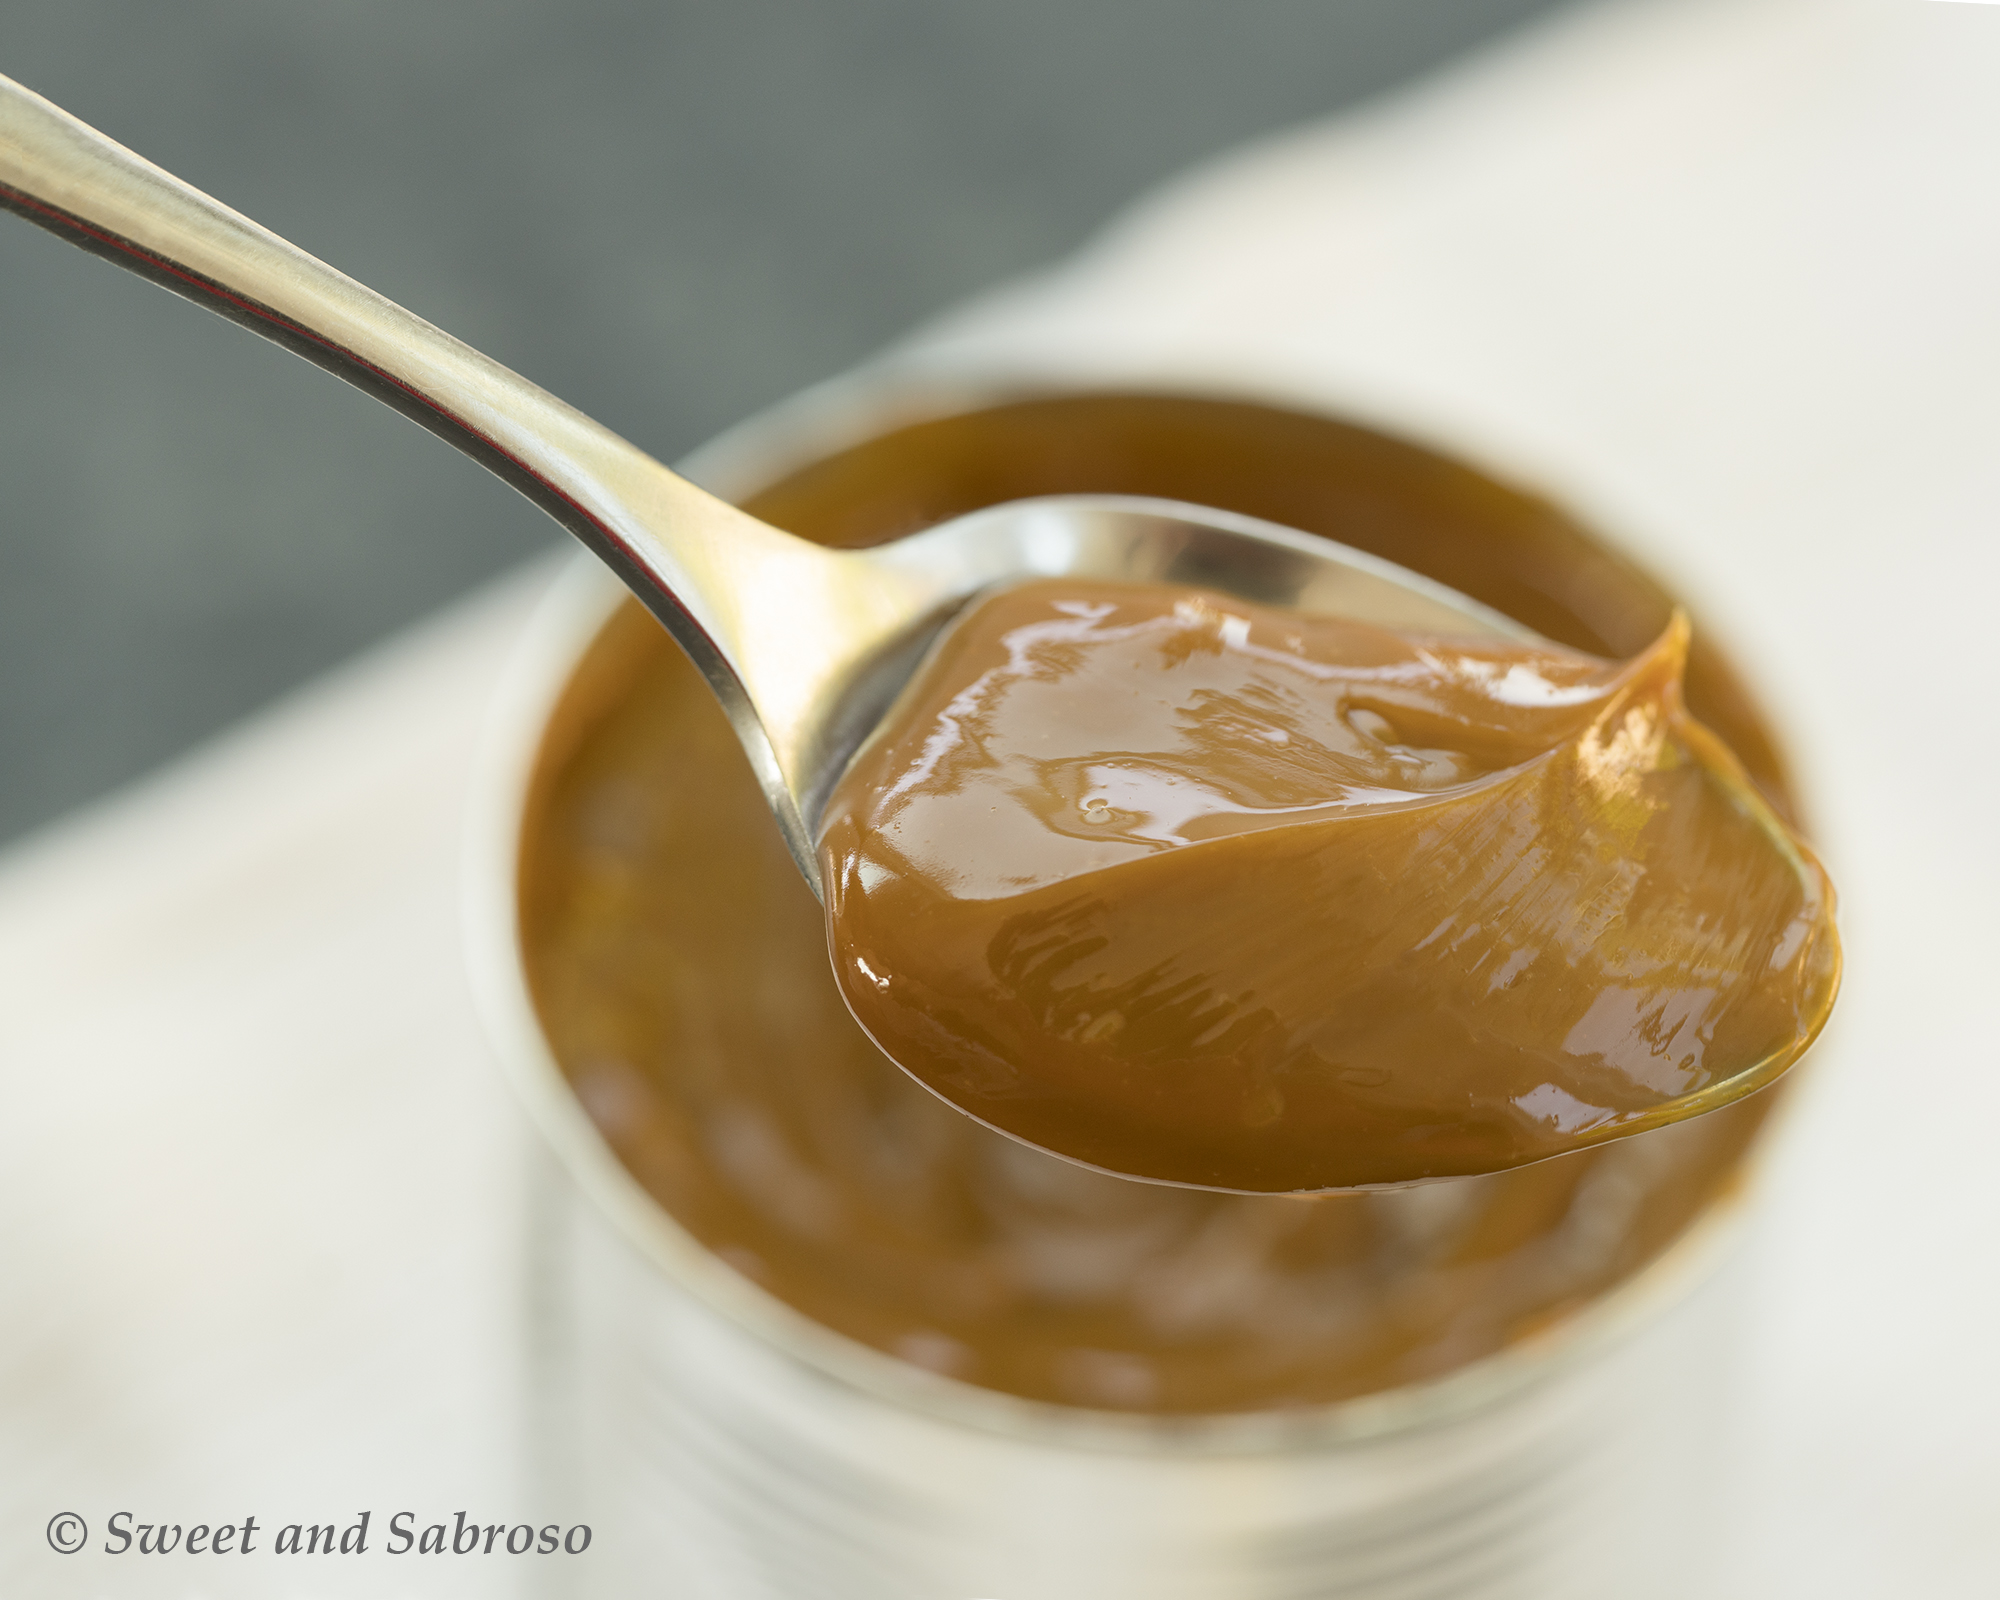 Spoonful of Dulce de Leche (Caramel) from a Can 